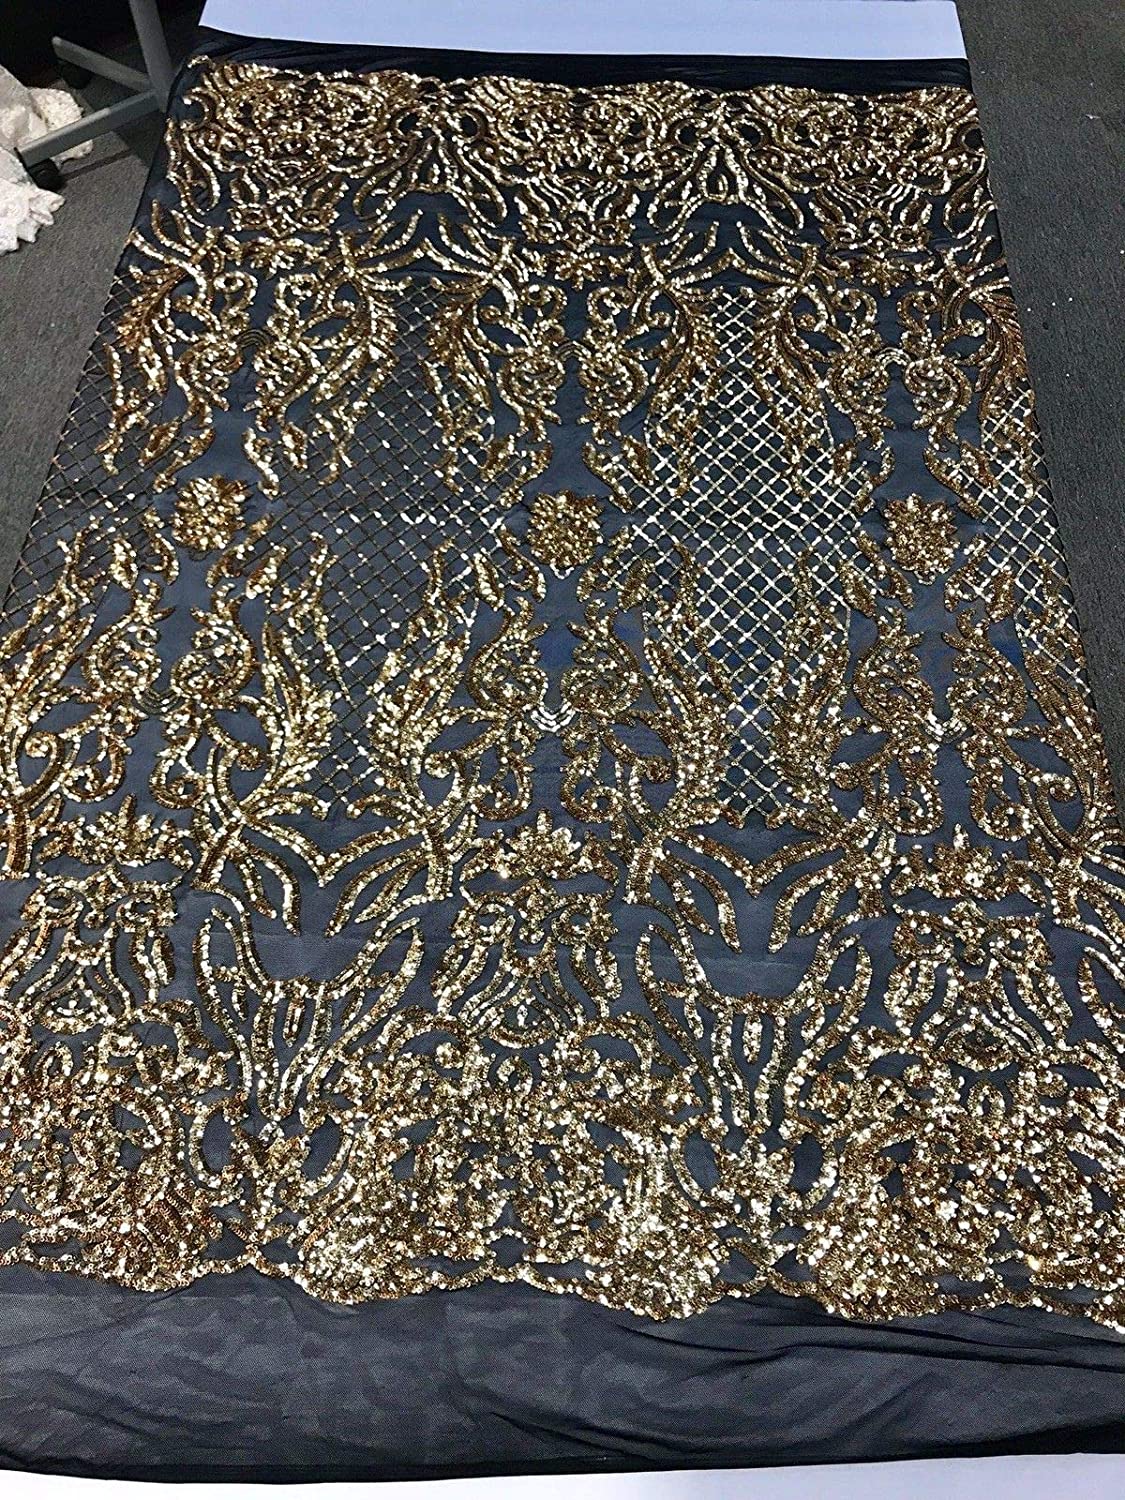 GOLD SHINY SEQUIN DAMASK DESIGN EMBROIDERY ON A BLACK 4 WAY STRETCH MESH-1 YARD.